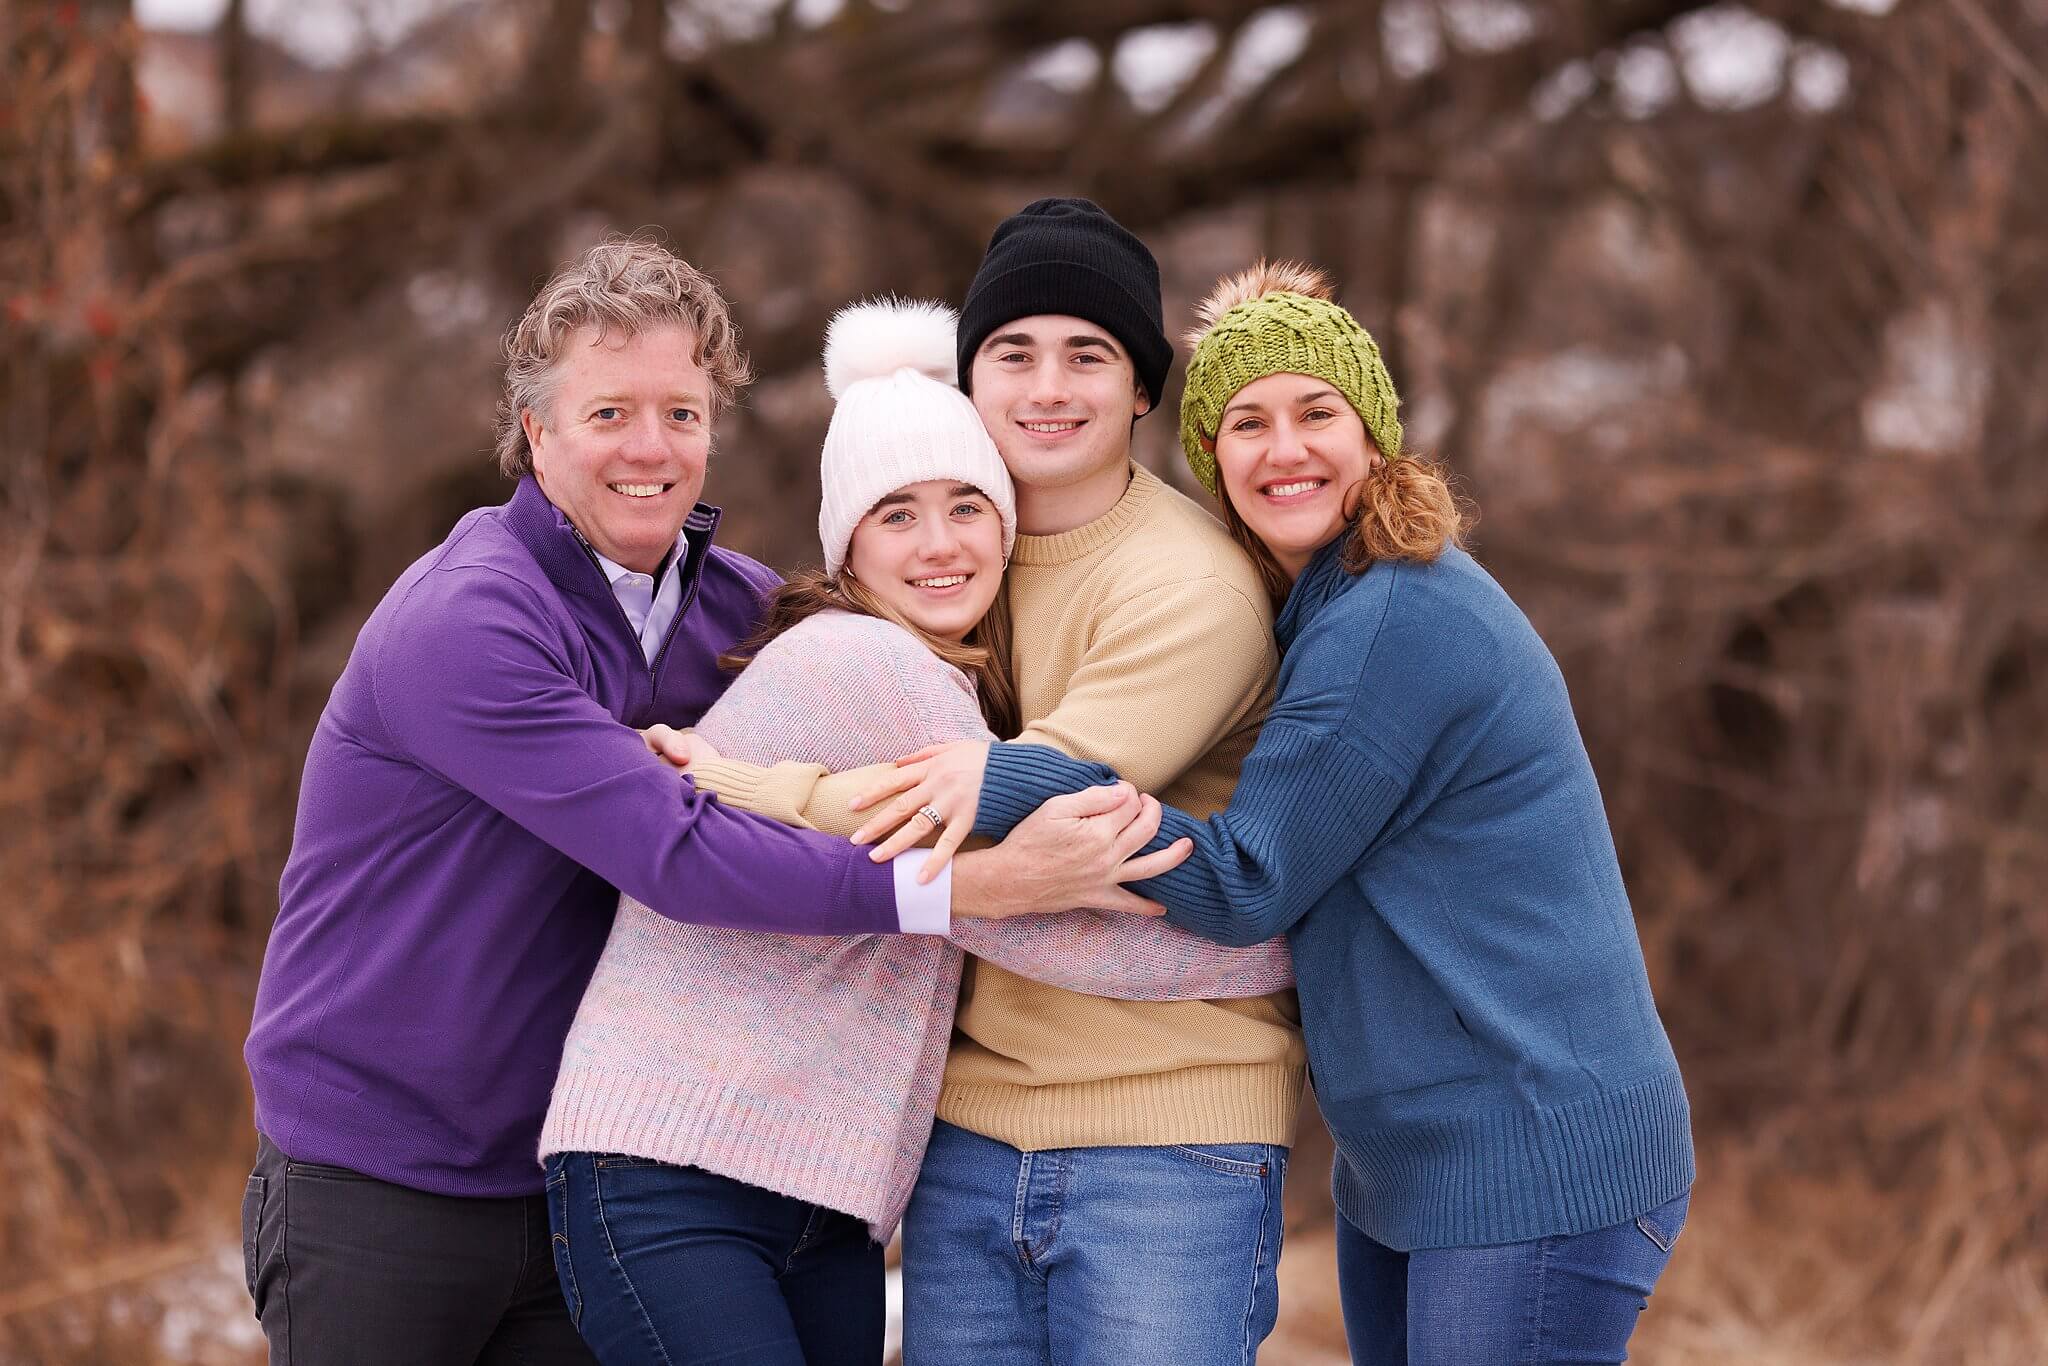 Family in colorful winter hats and sweaters embracing with bare trees in the background. Winter portrait by Toronto Family Photographer